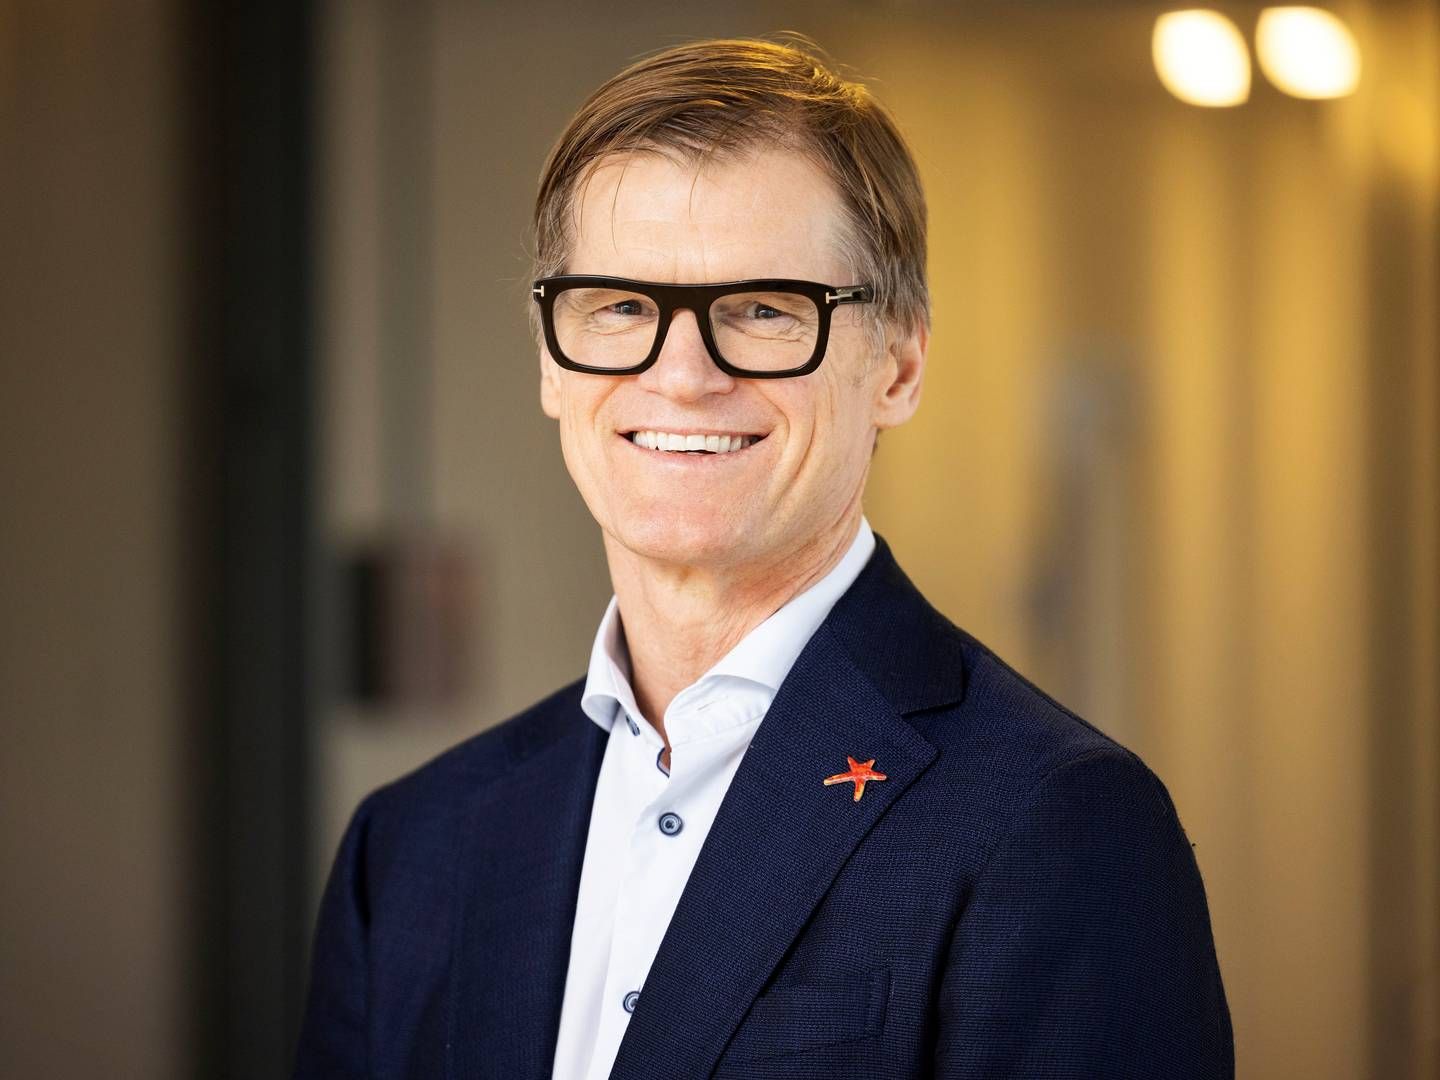 This is a decision that has been made in full agreement between the parties, says CEO Charl van Zyl about COO Jacob Tolstrup's departure from Lundbeck after 25 years with the company. | Photo: Lundbeck